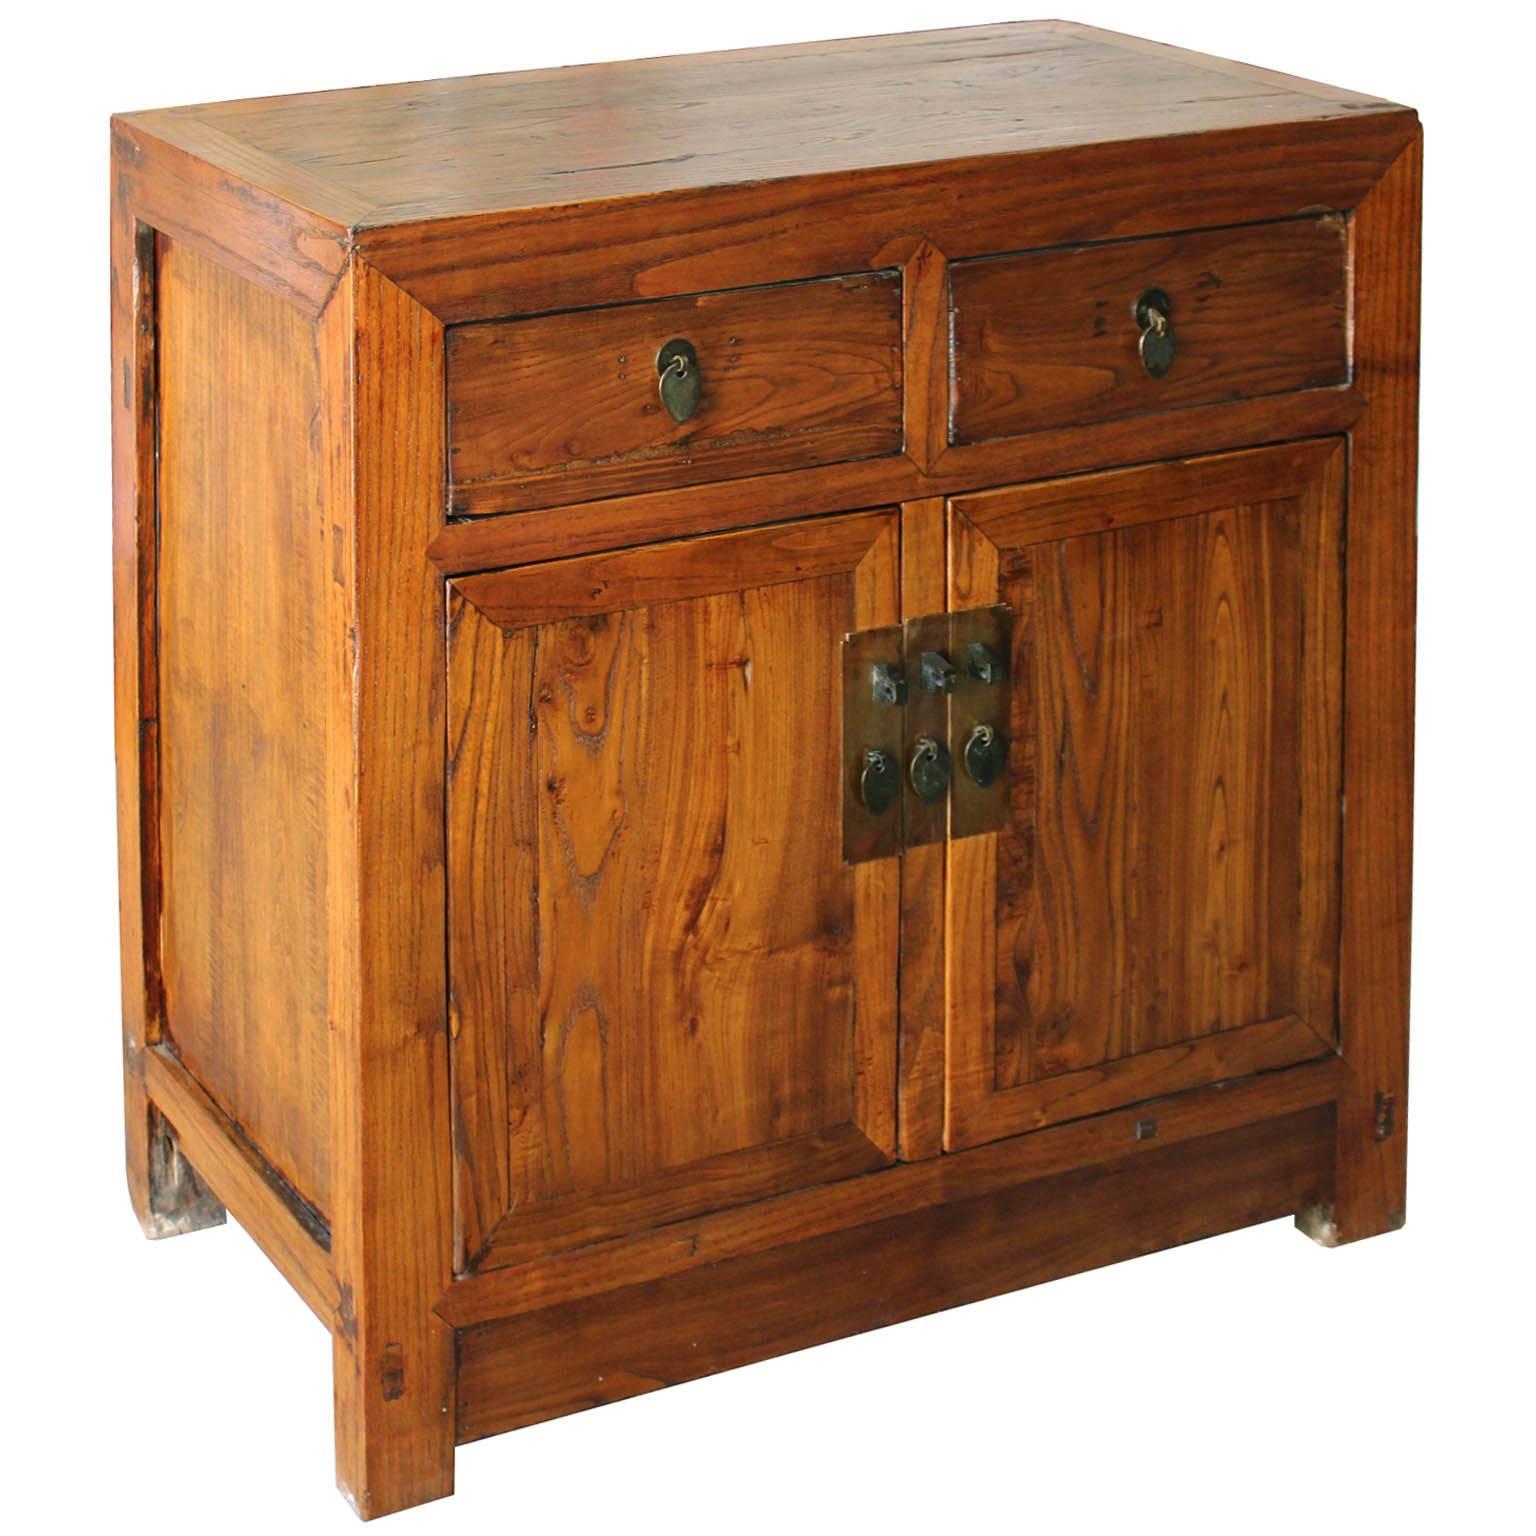 Beijing chest with beautiful elm grain and clean lines can be placed next to a sofa with a lamp and accessories on top. Middle bar removed for easy interior access, with new shelf and hardware, circa 1900s.